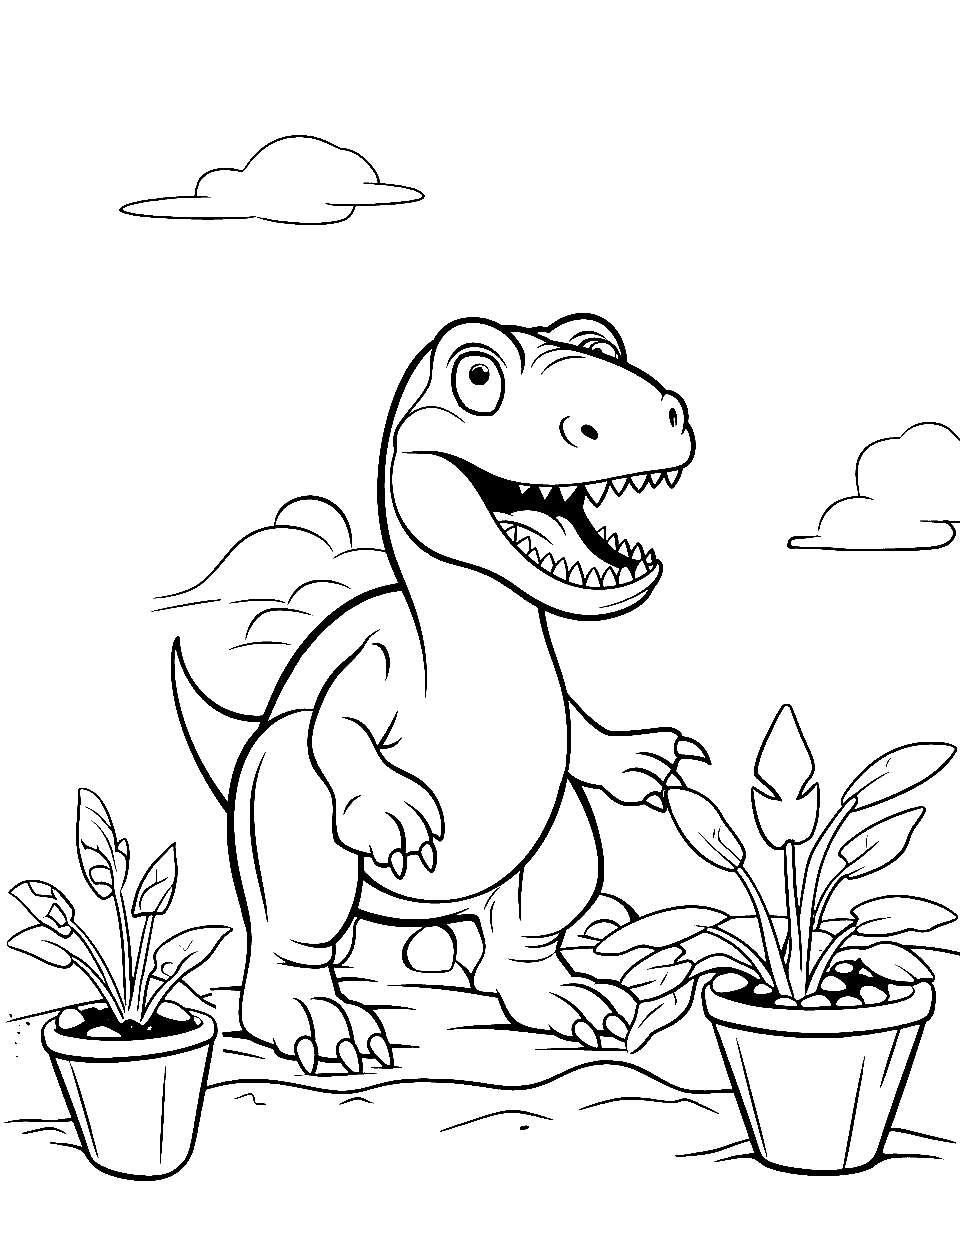 T Rex's Gardening Day T-rex Coloring Page - A small T-Rex in its little garden with potplants.